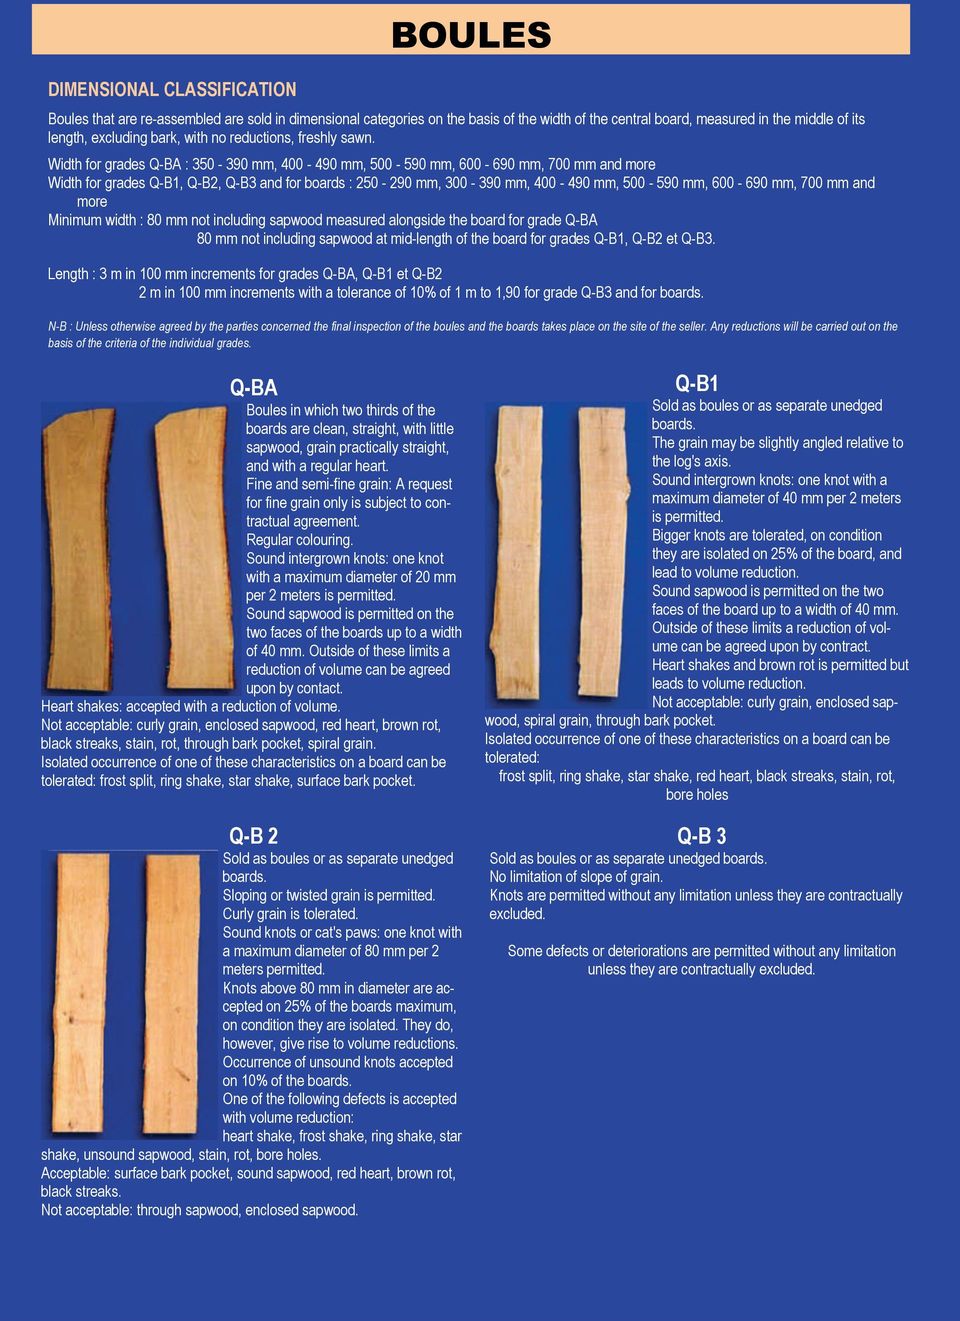 Width for grades Q-BA : 350-390 mm, 400-490 mm, 500-590 mm, 600-690 mm, 700 mm and more Width for grades Q-B1, Q-B2, Q-B3 and for boards : 250-290 mm, 300-390 mm, 400-490 mm, 500-590 mm, 600-690 mm,